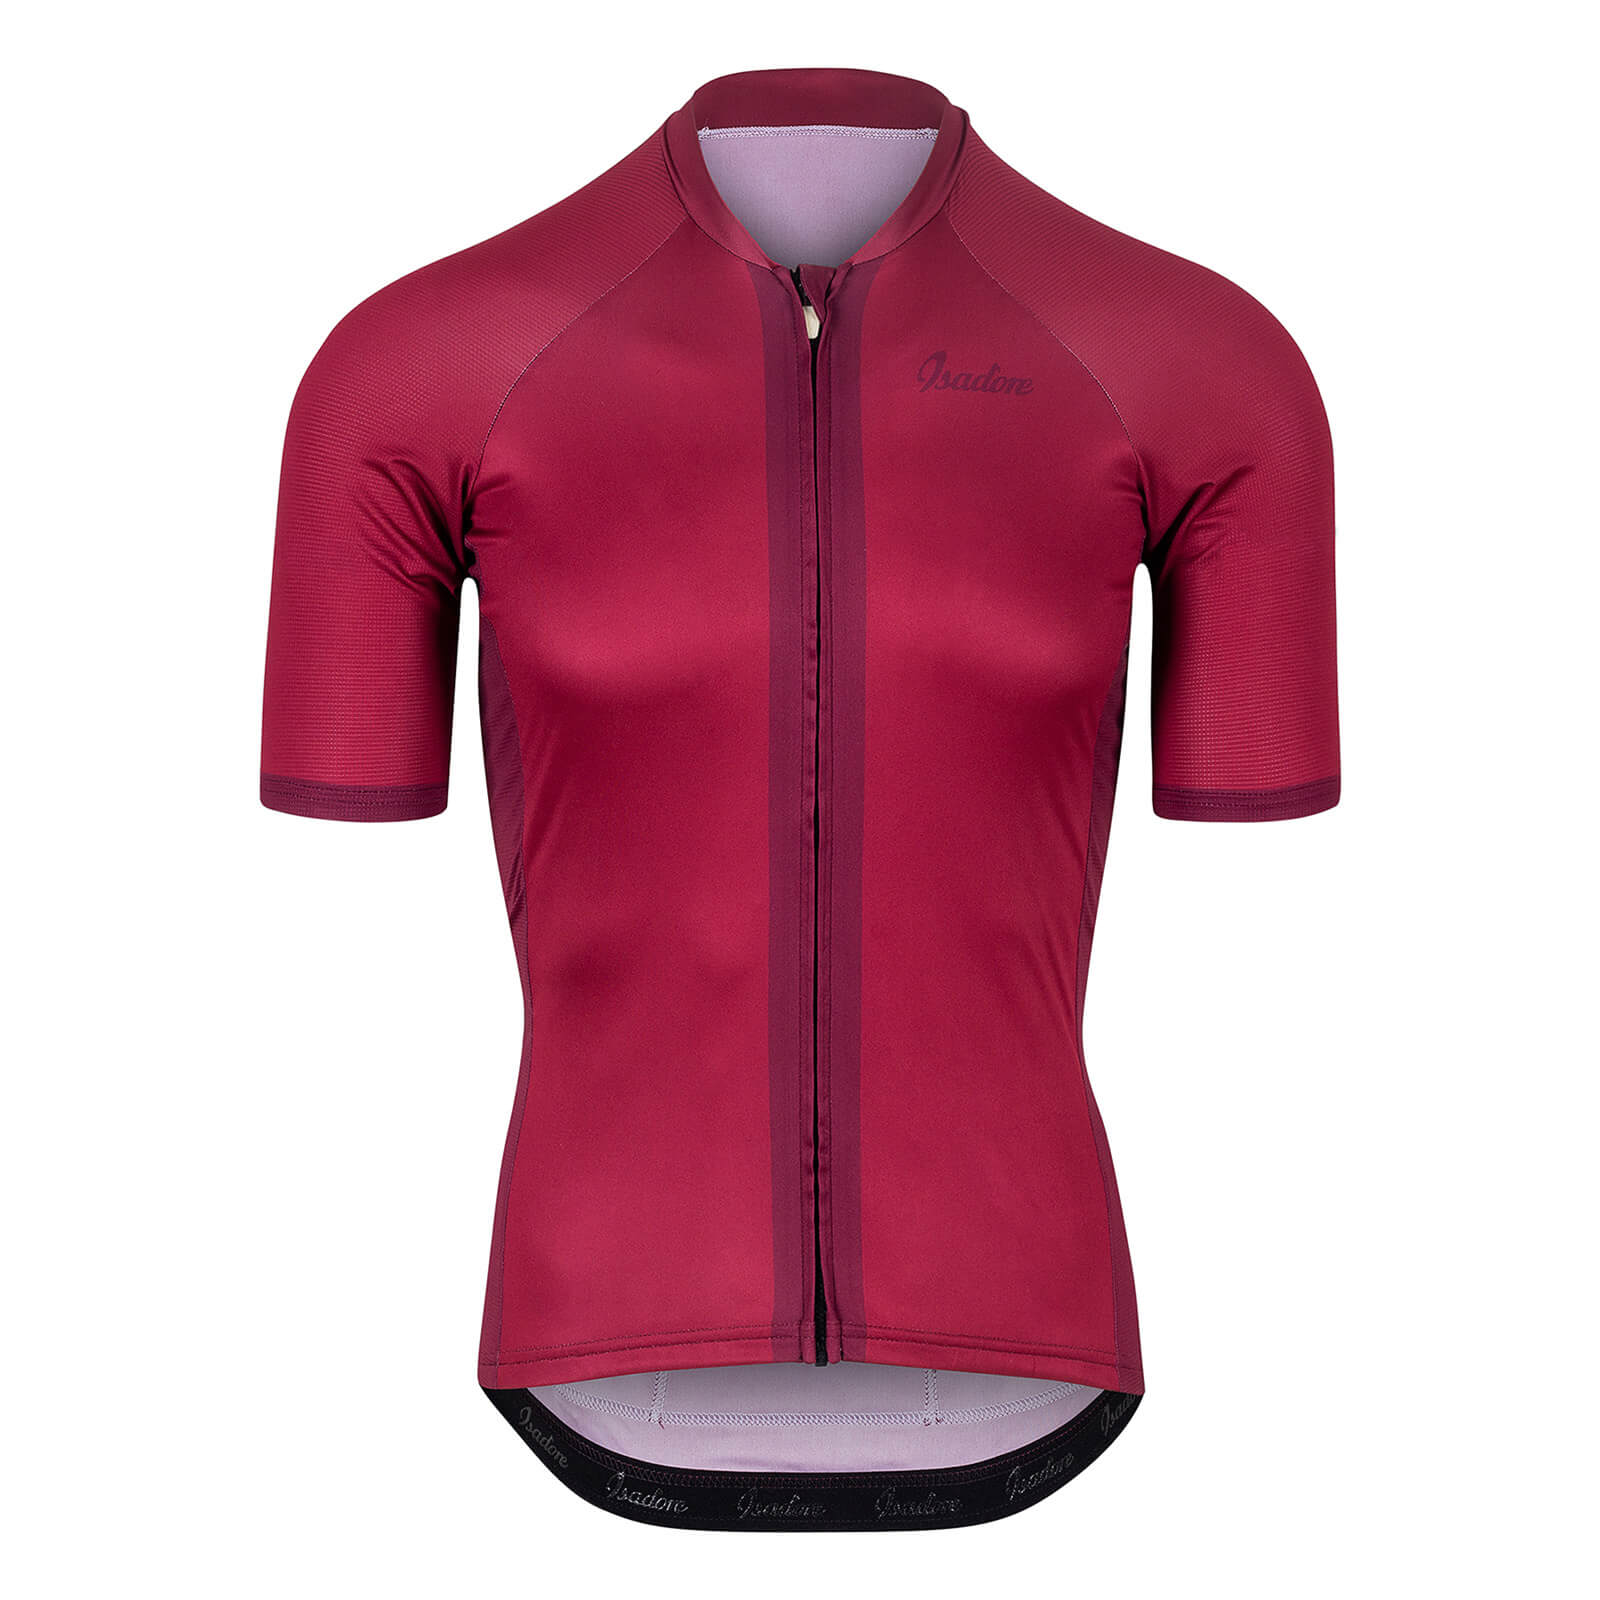 Isadore Debut Short Sleeve Jersey - Groß - Rio Red